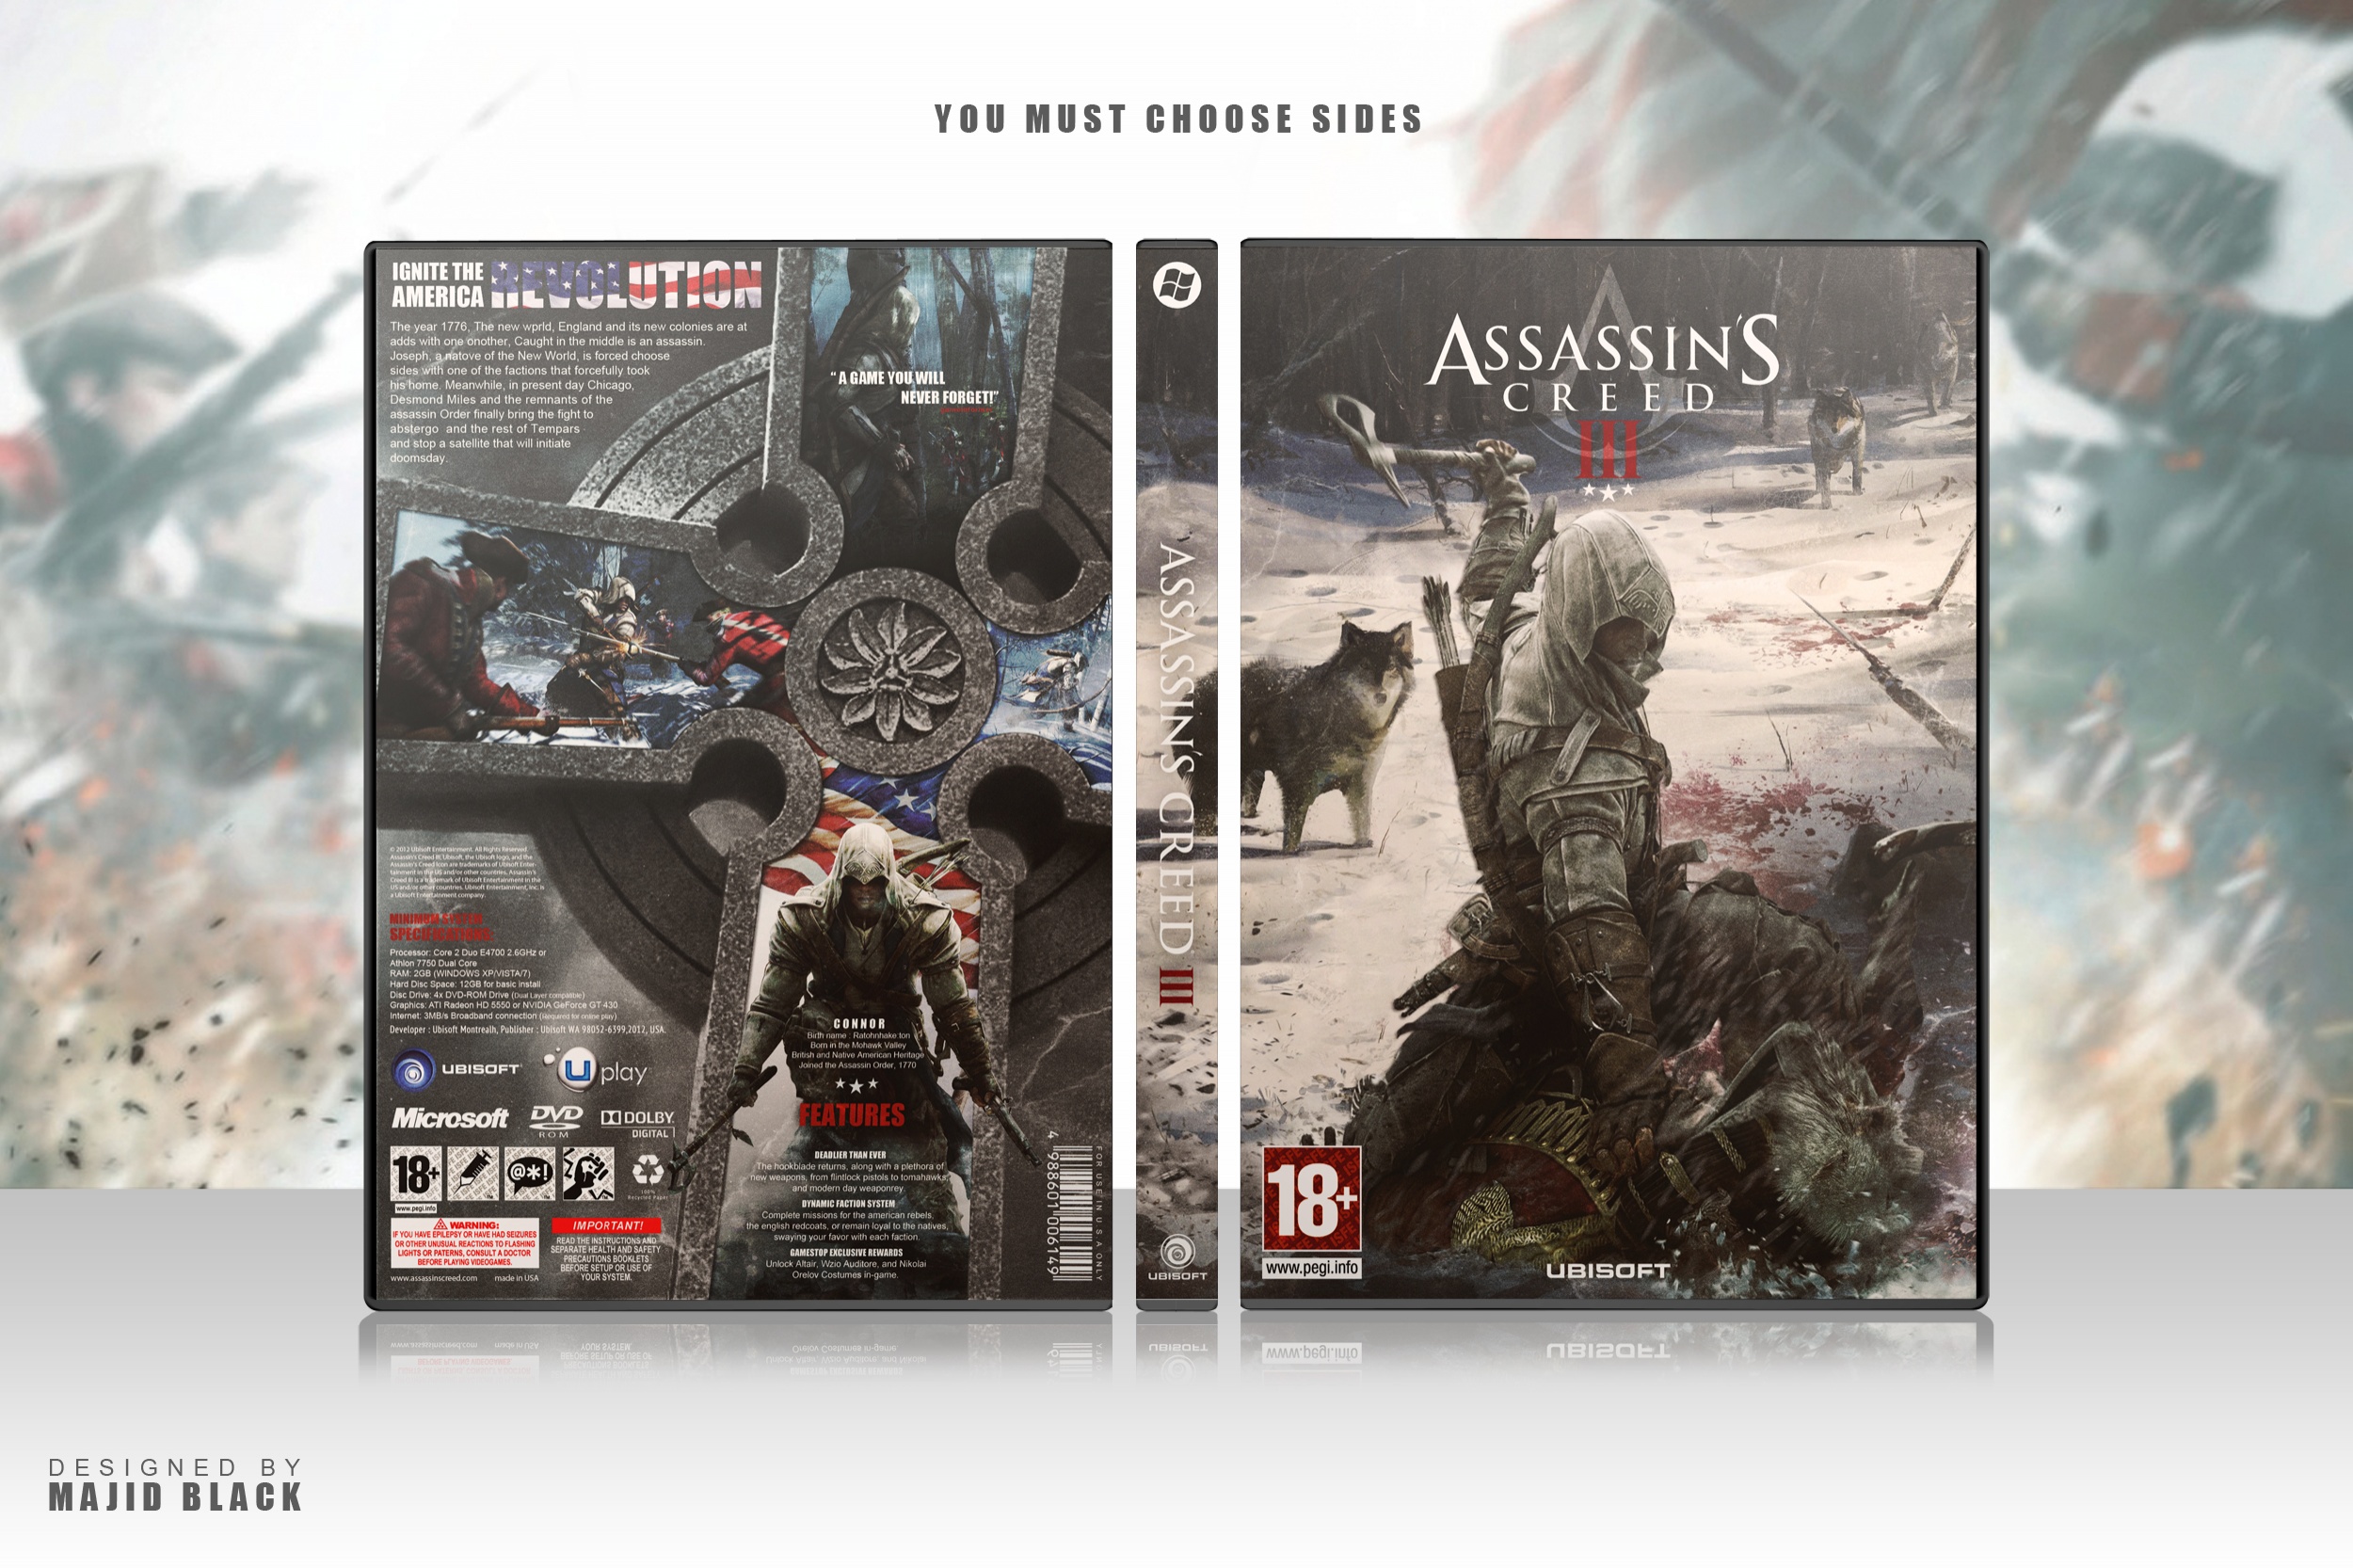 Assassin's Creed III box cover